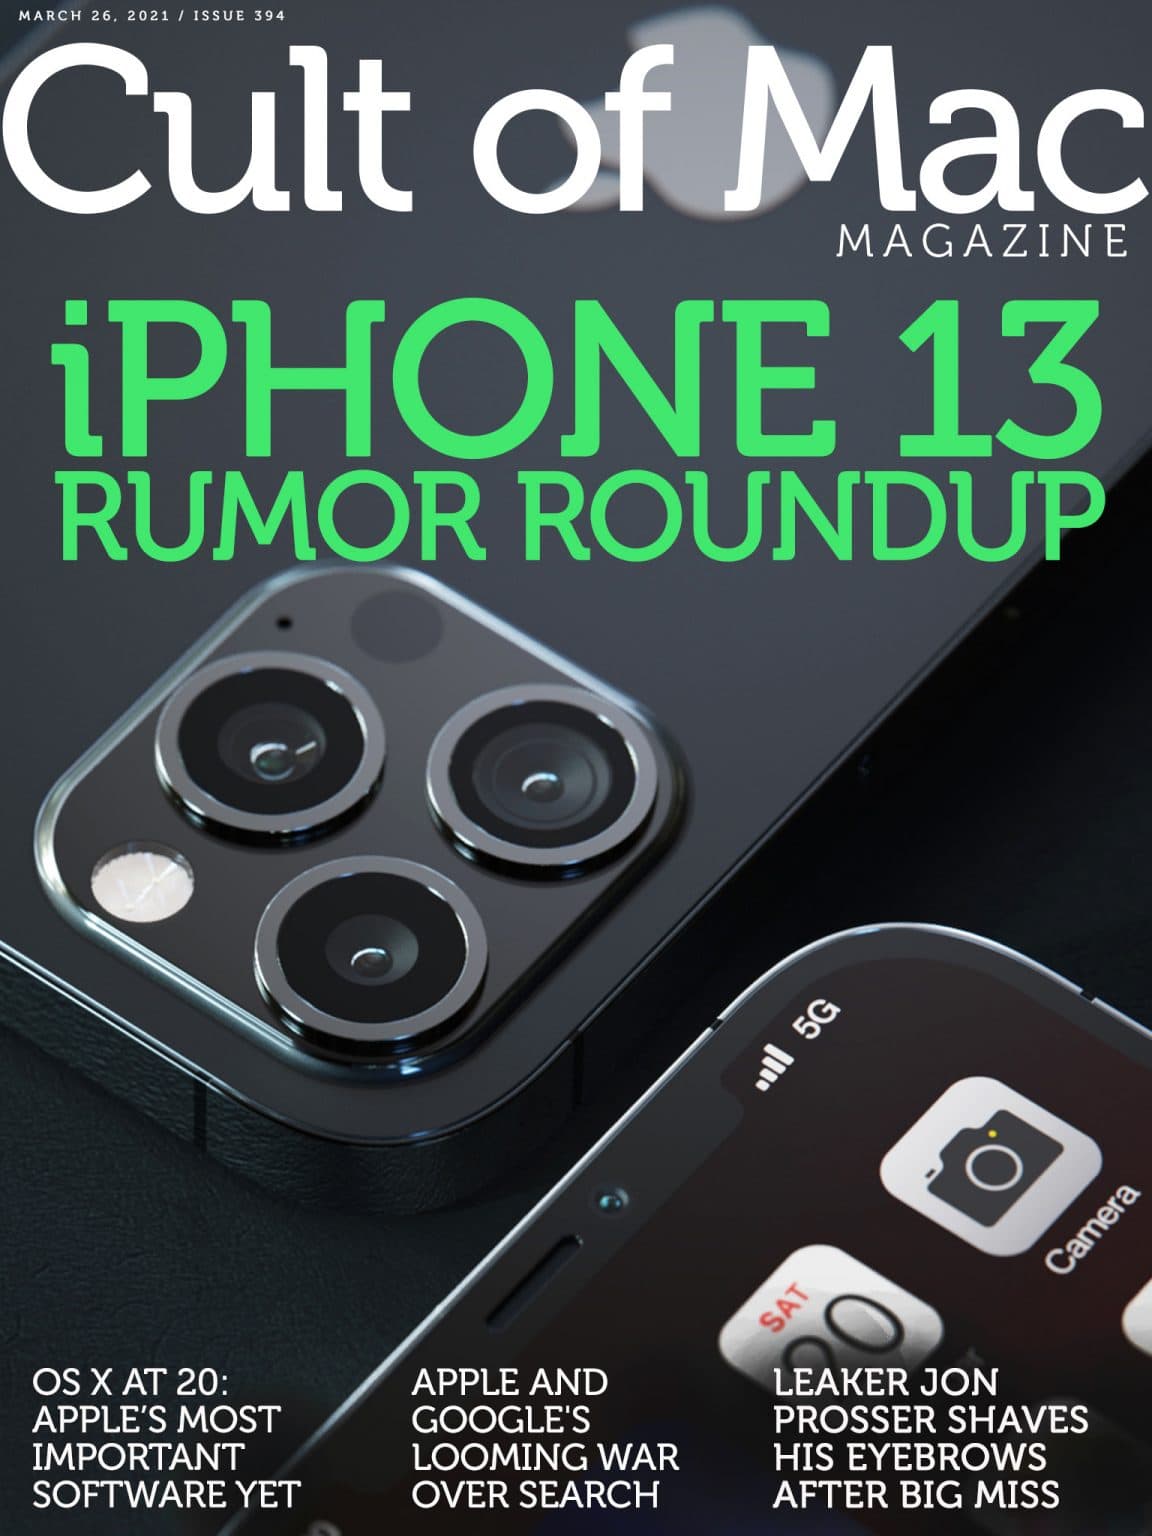 iPhone 13 rumor roundup: Here's what we know so far.